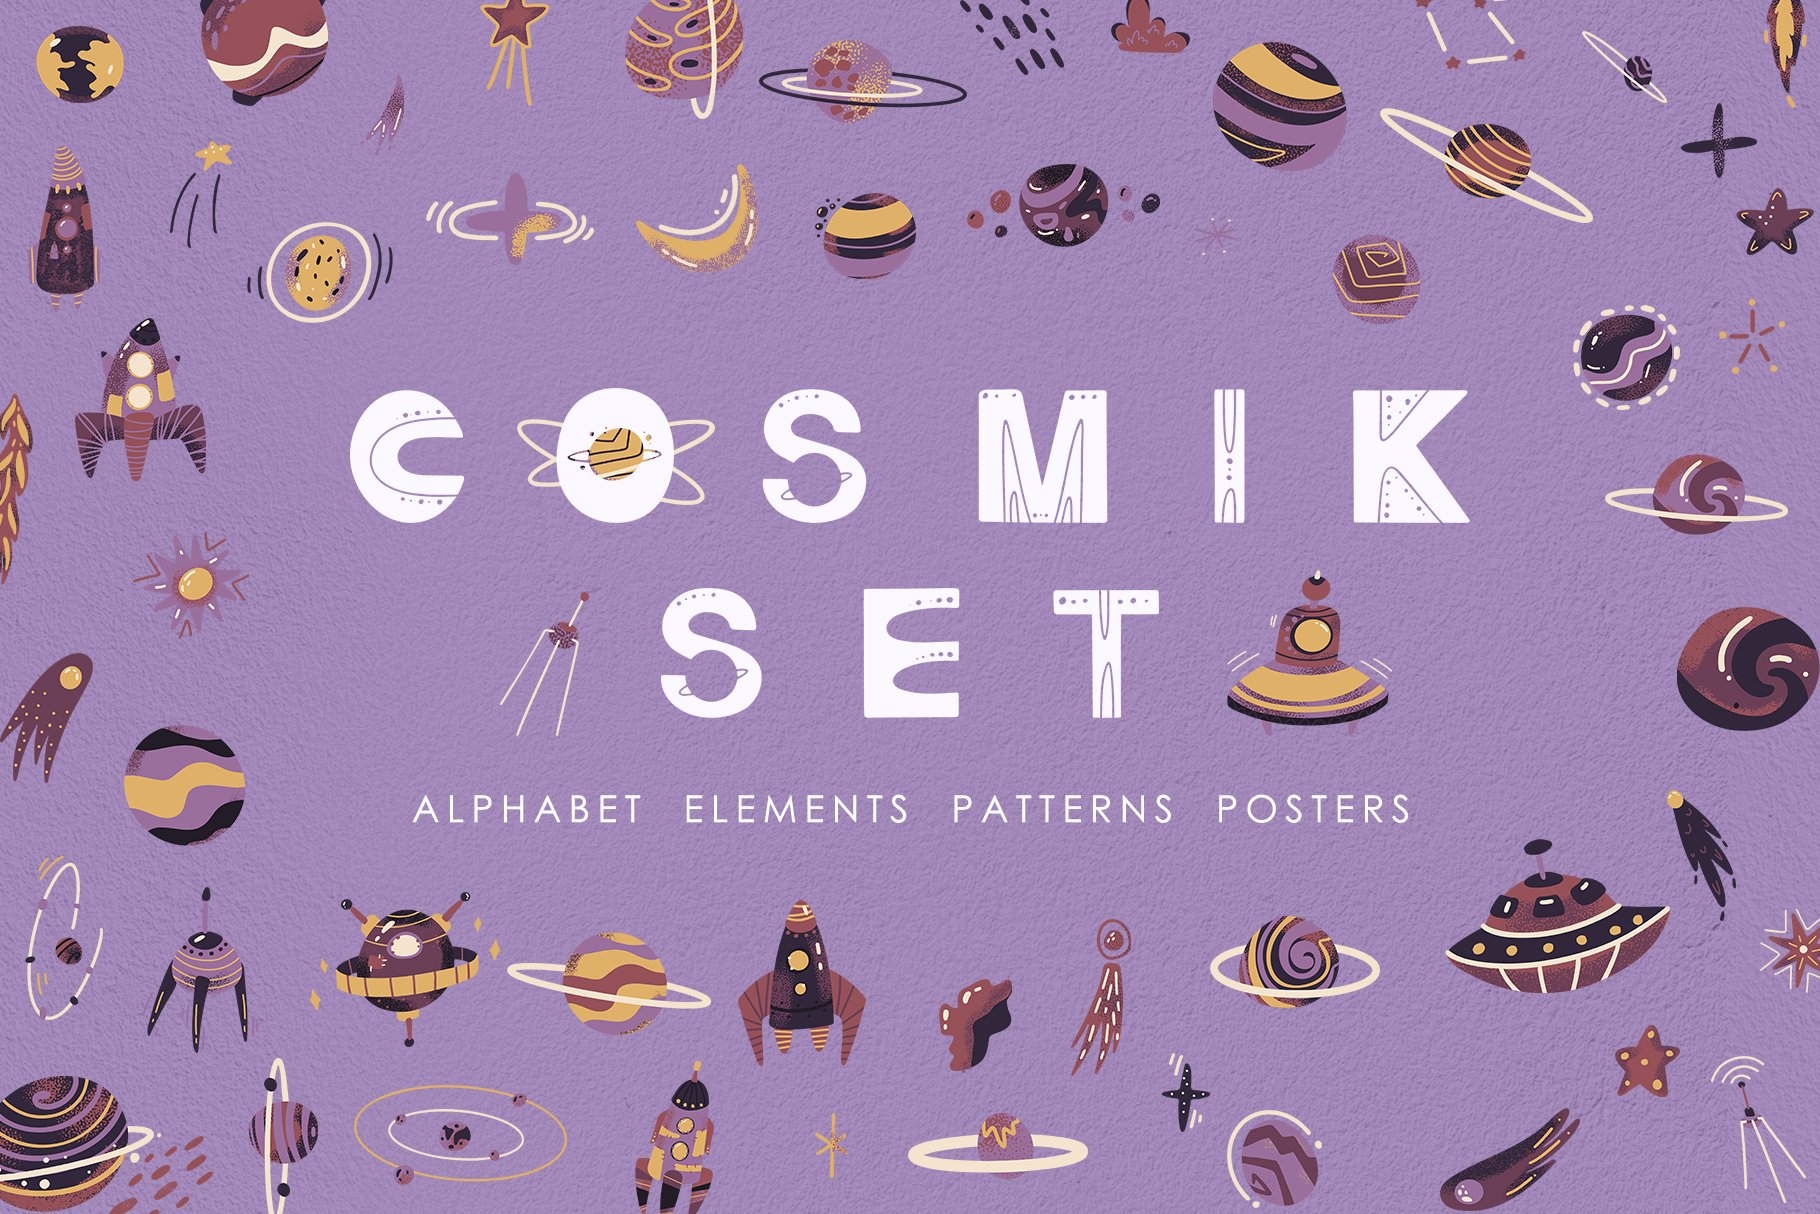 Cosmic Set cover image.